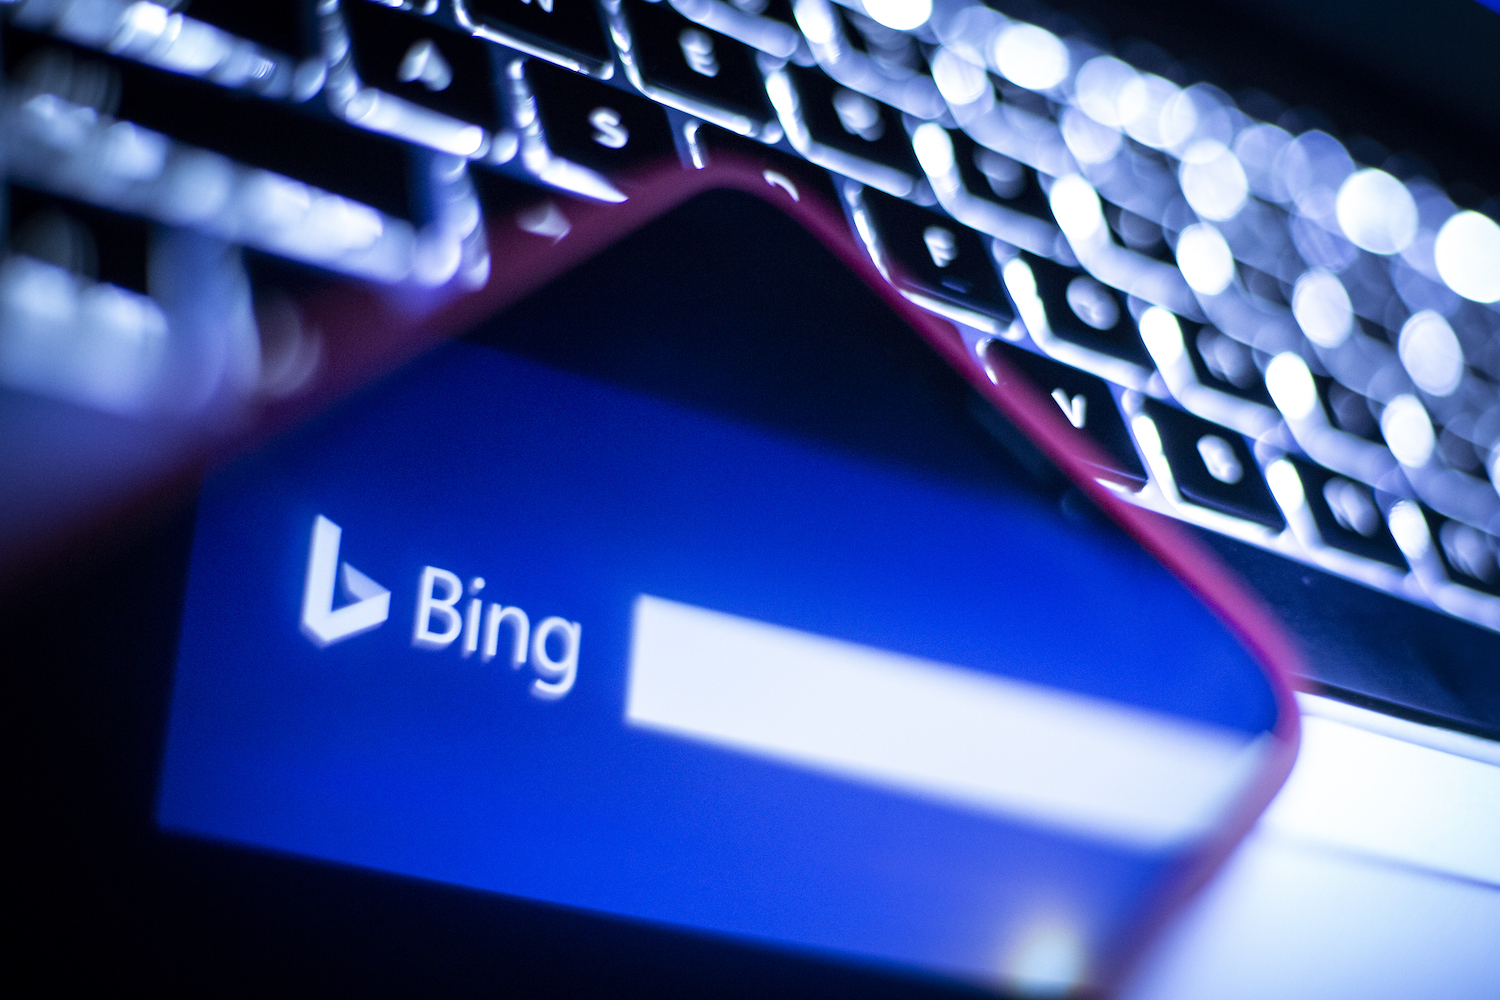 Microsoft says Bing can be provoked to respond outside of its ‘designed tone’